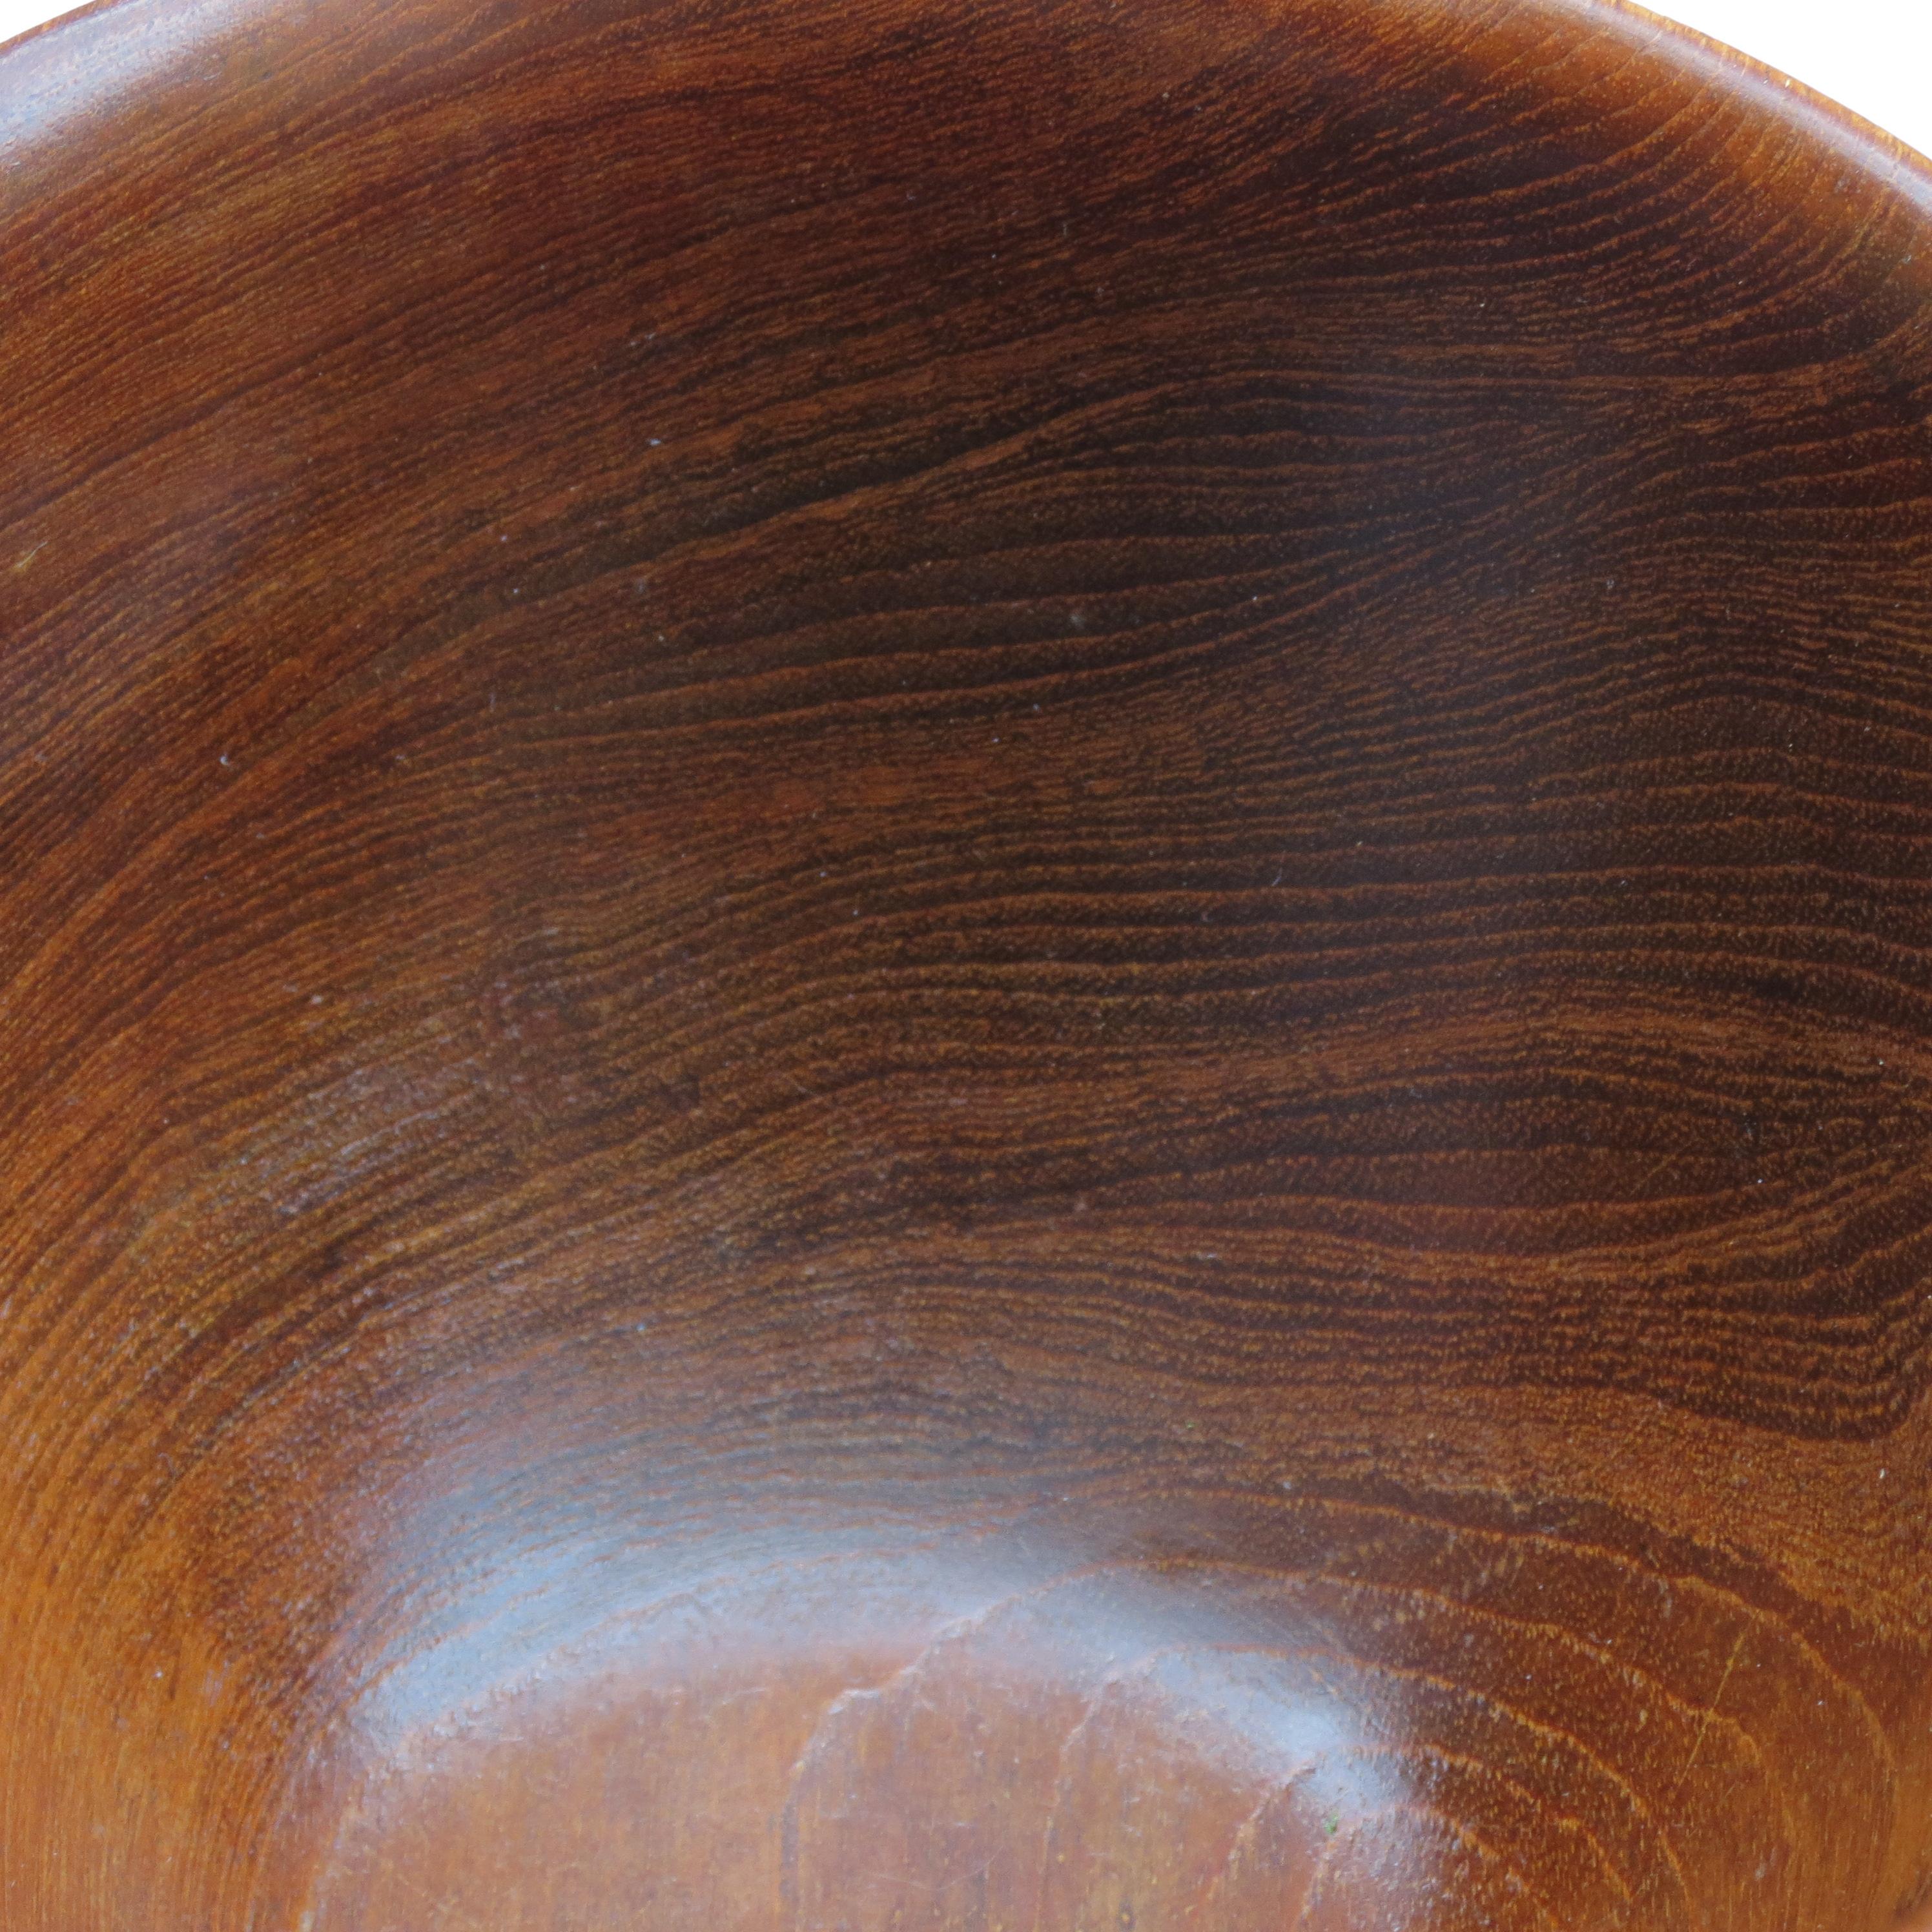 Hand-Crafted Large Midcentury Teak Wooden Bowl by Galatix, England, 1970s